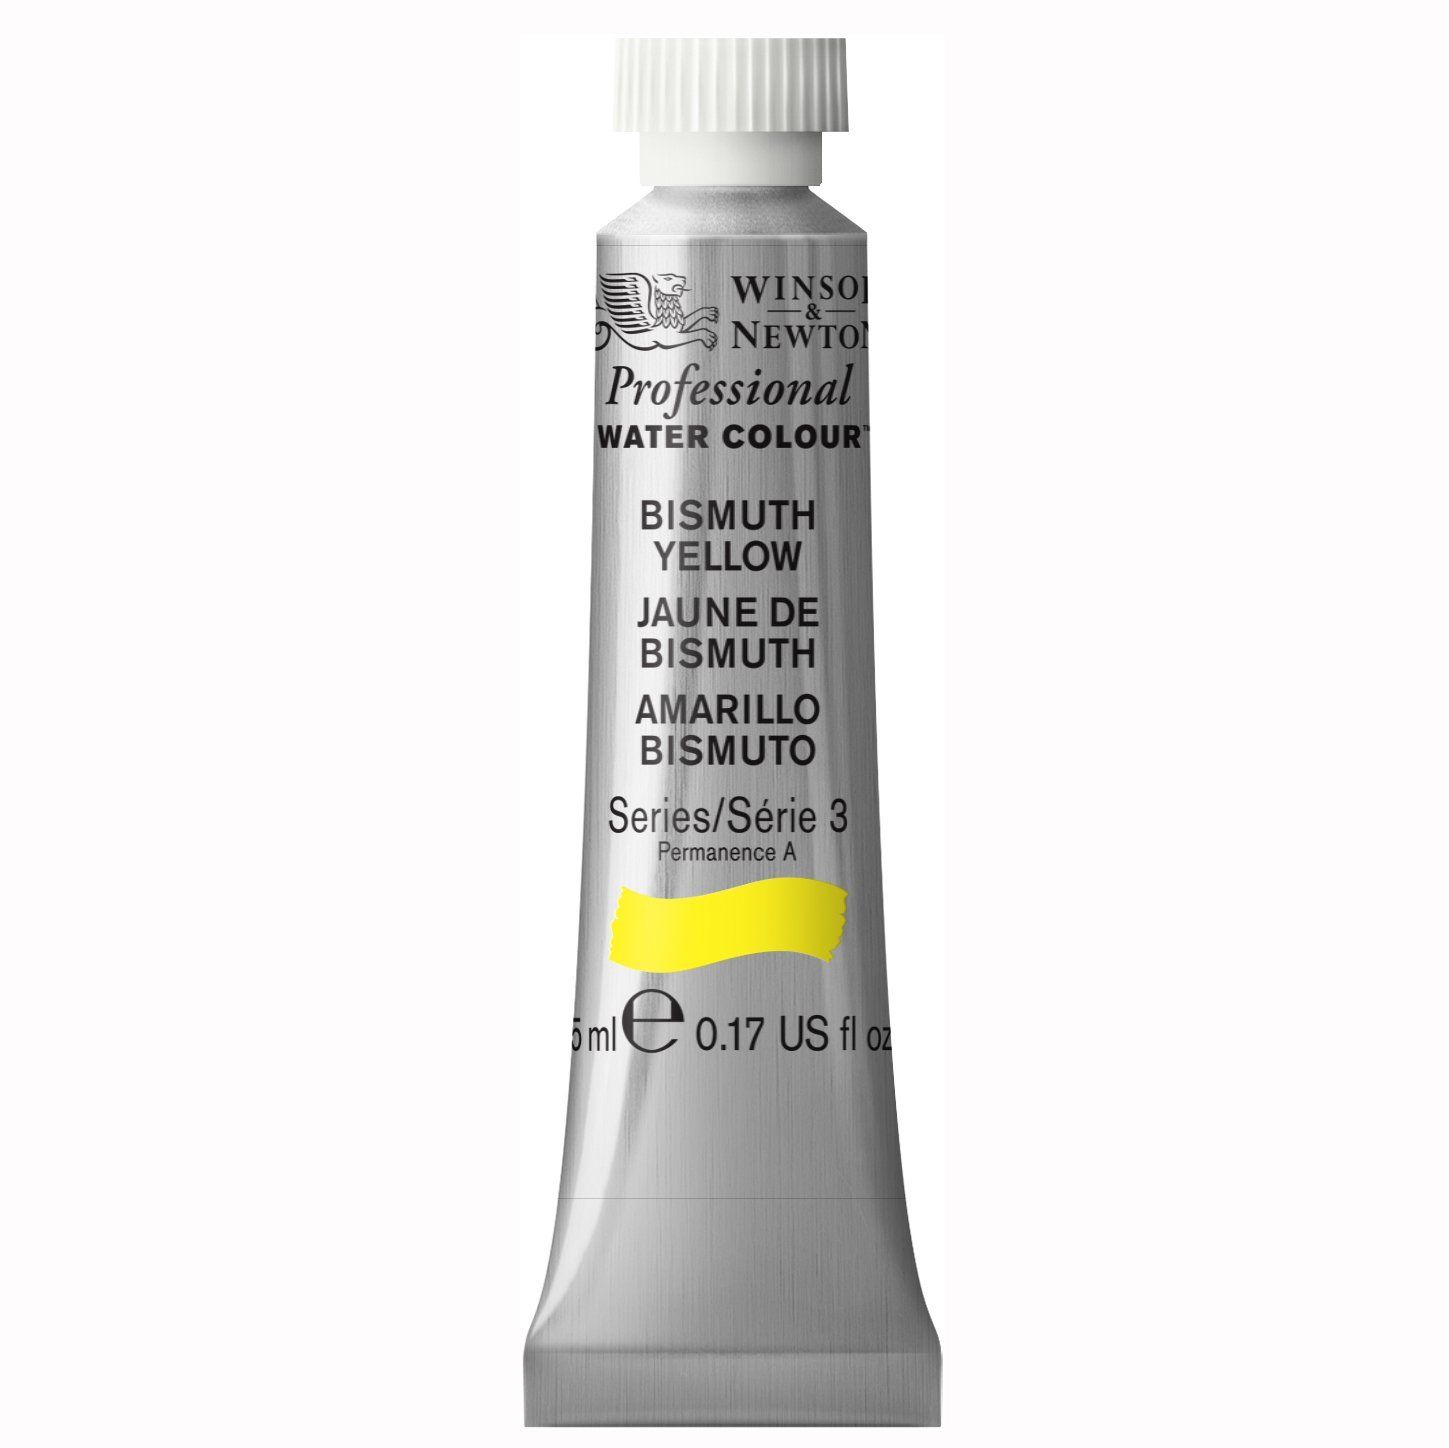 Winsor & Newton Watercolour Paint - Bismuth Yellow 5ml